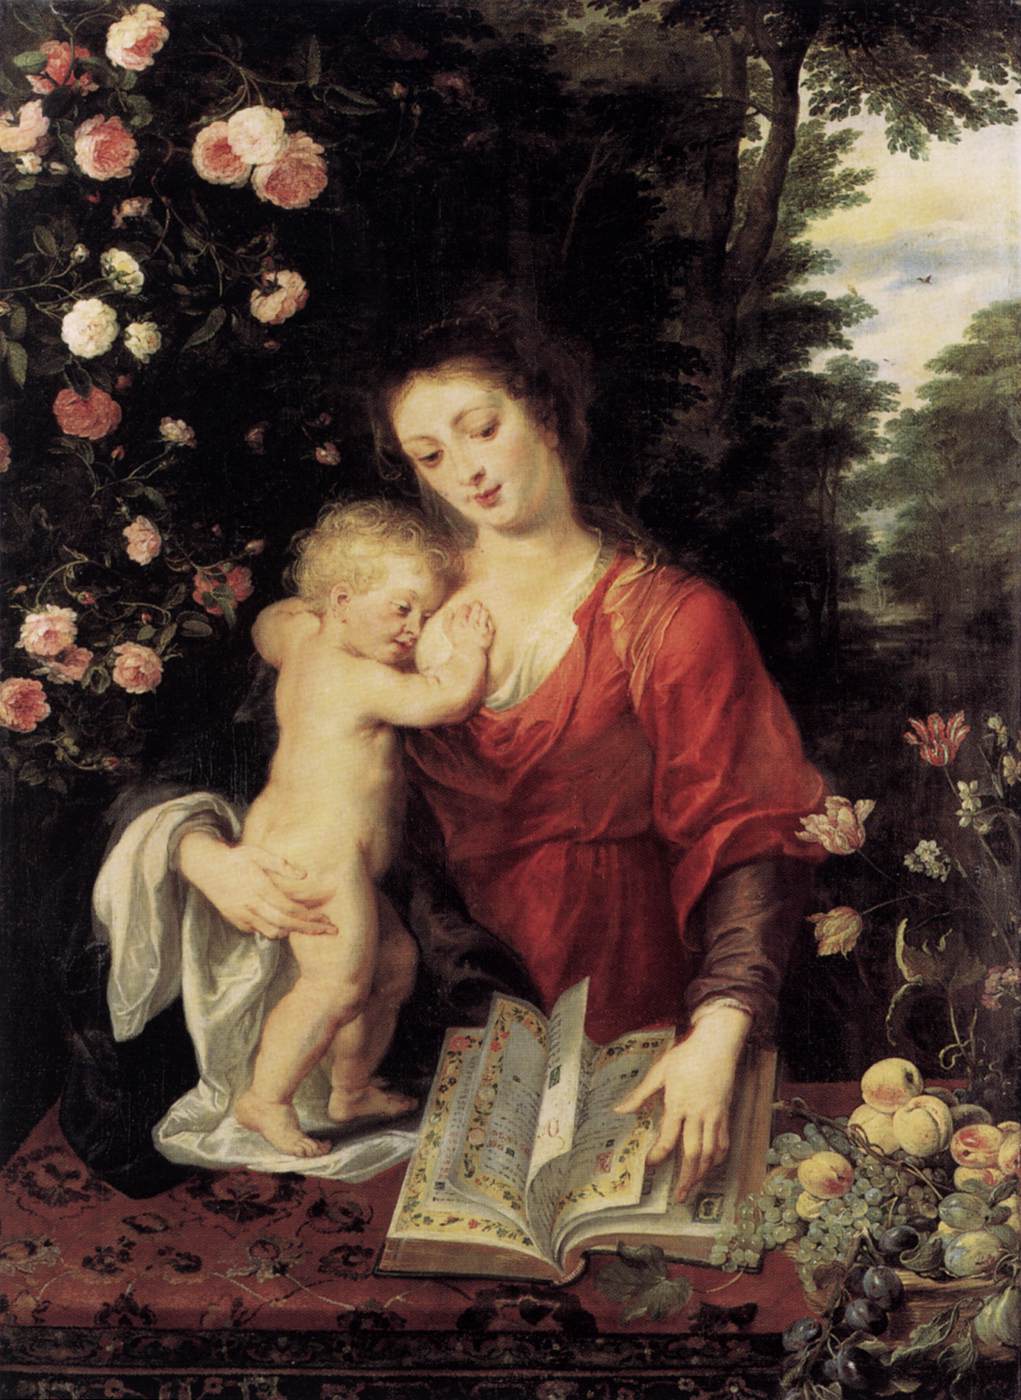 Virgin and Child by Peter Paul Rubens Reproduction Oil Painting on Canvas